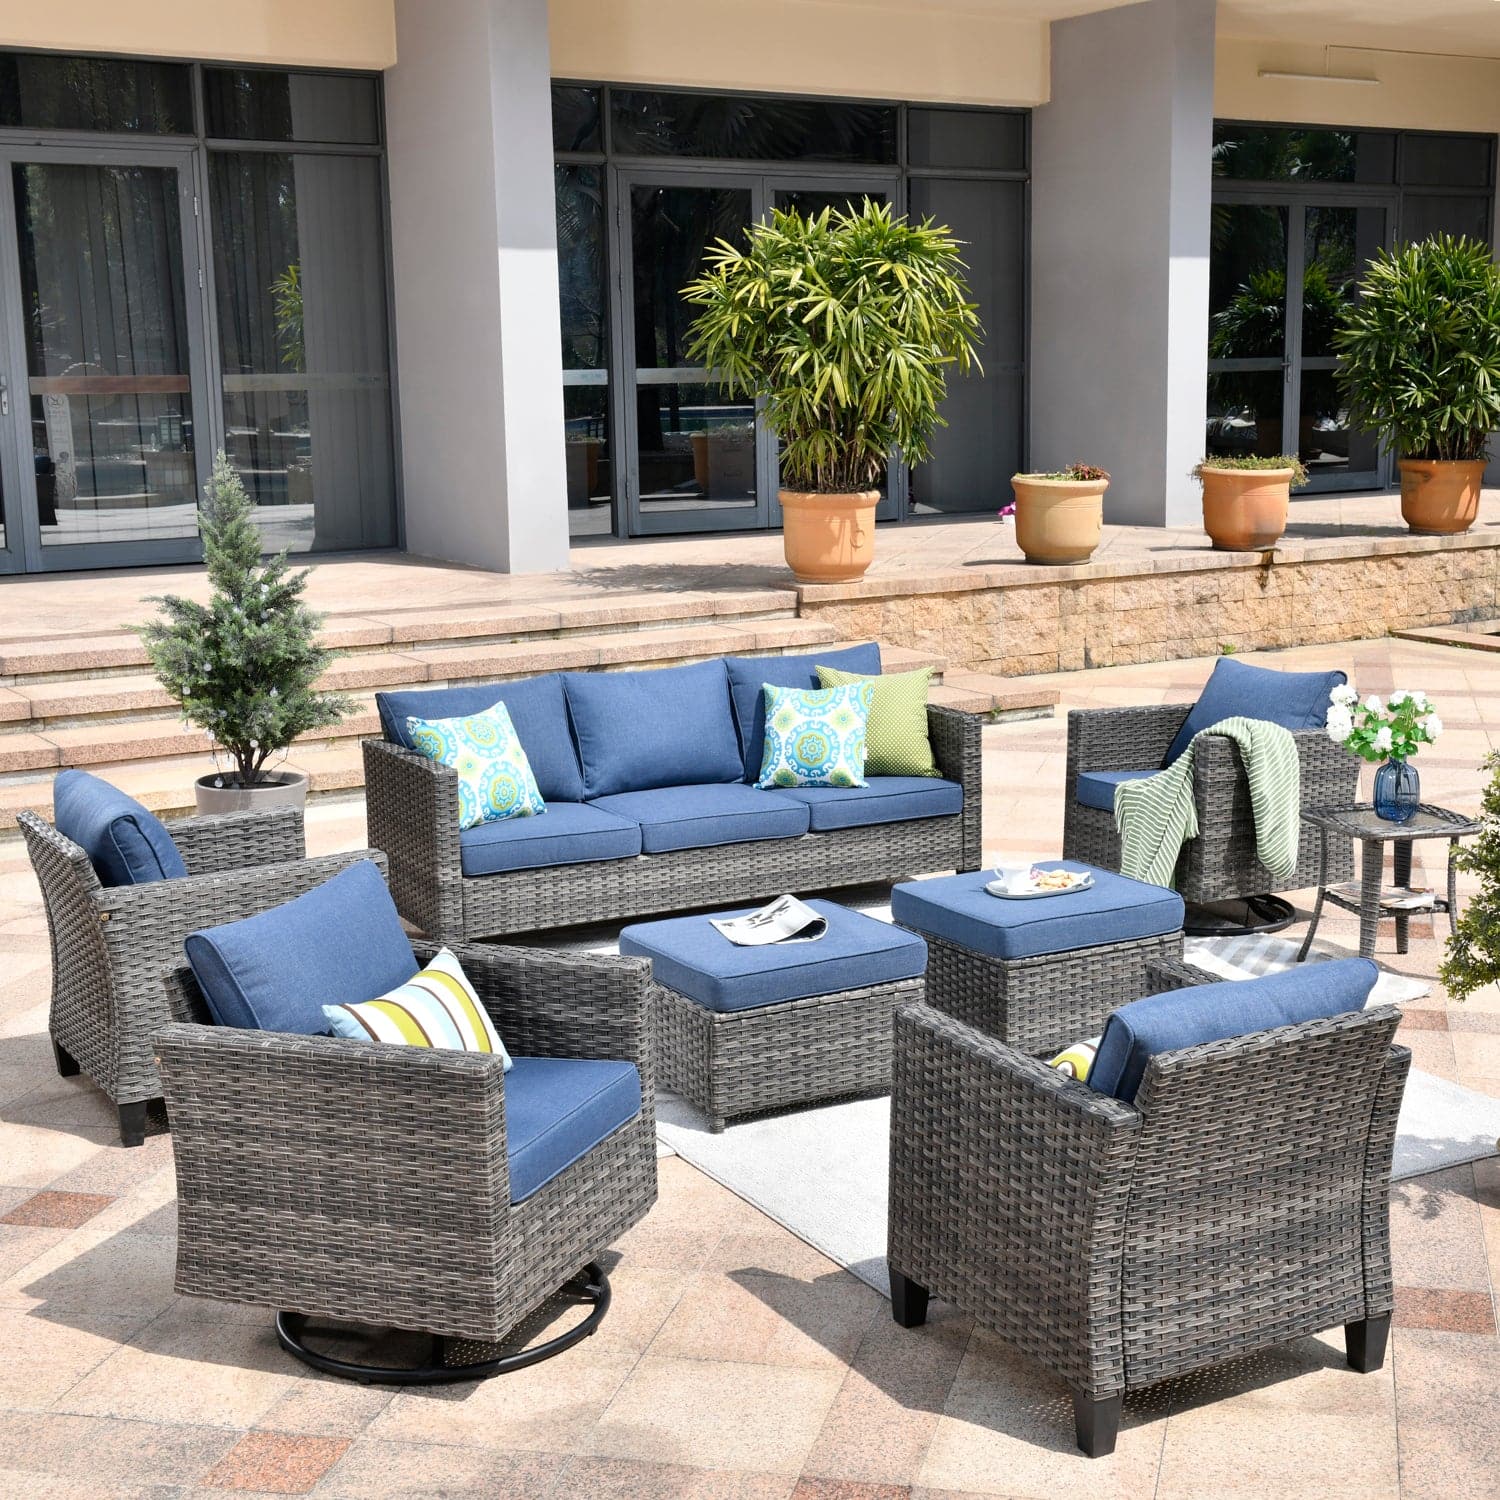 Ovios Patio Conversation Set 8-Piece with Swivel Rocking Chairs and Table